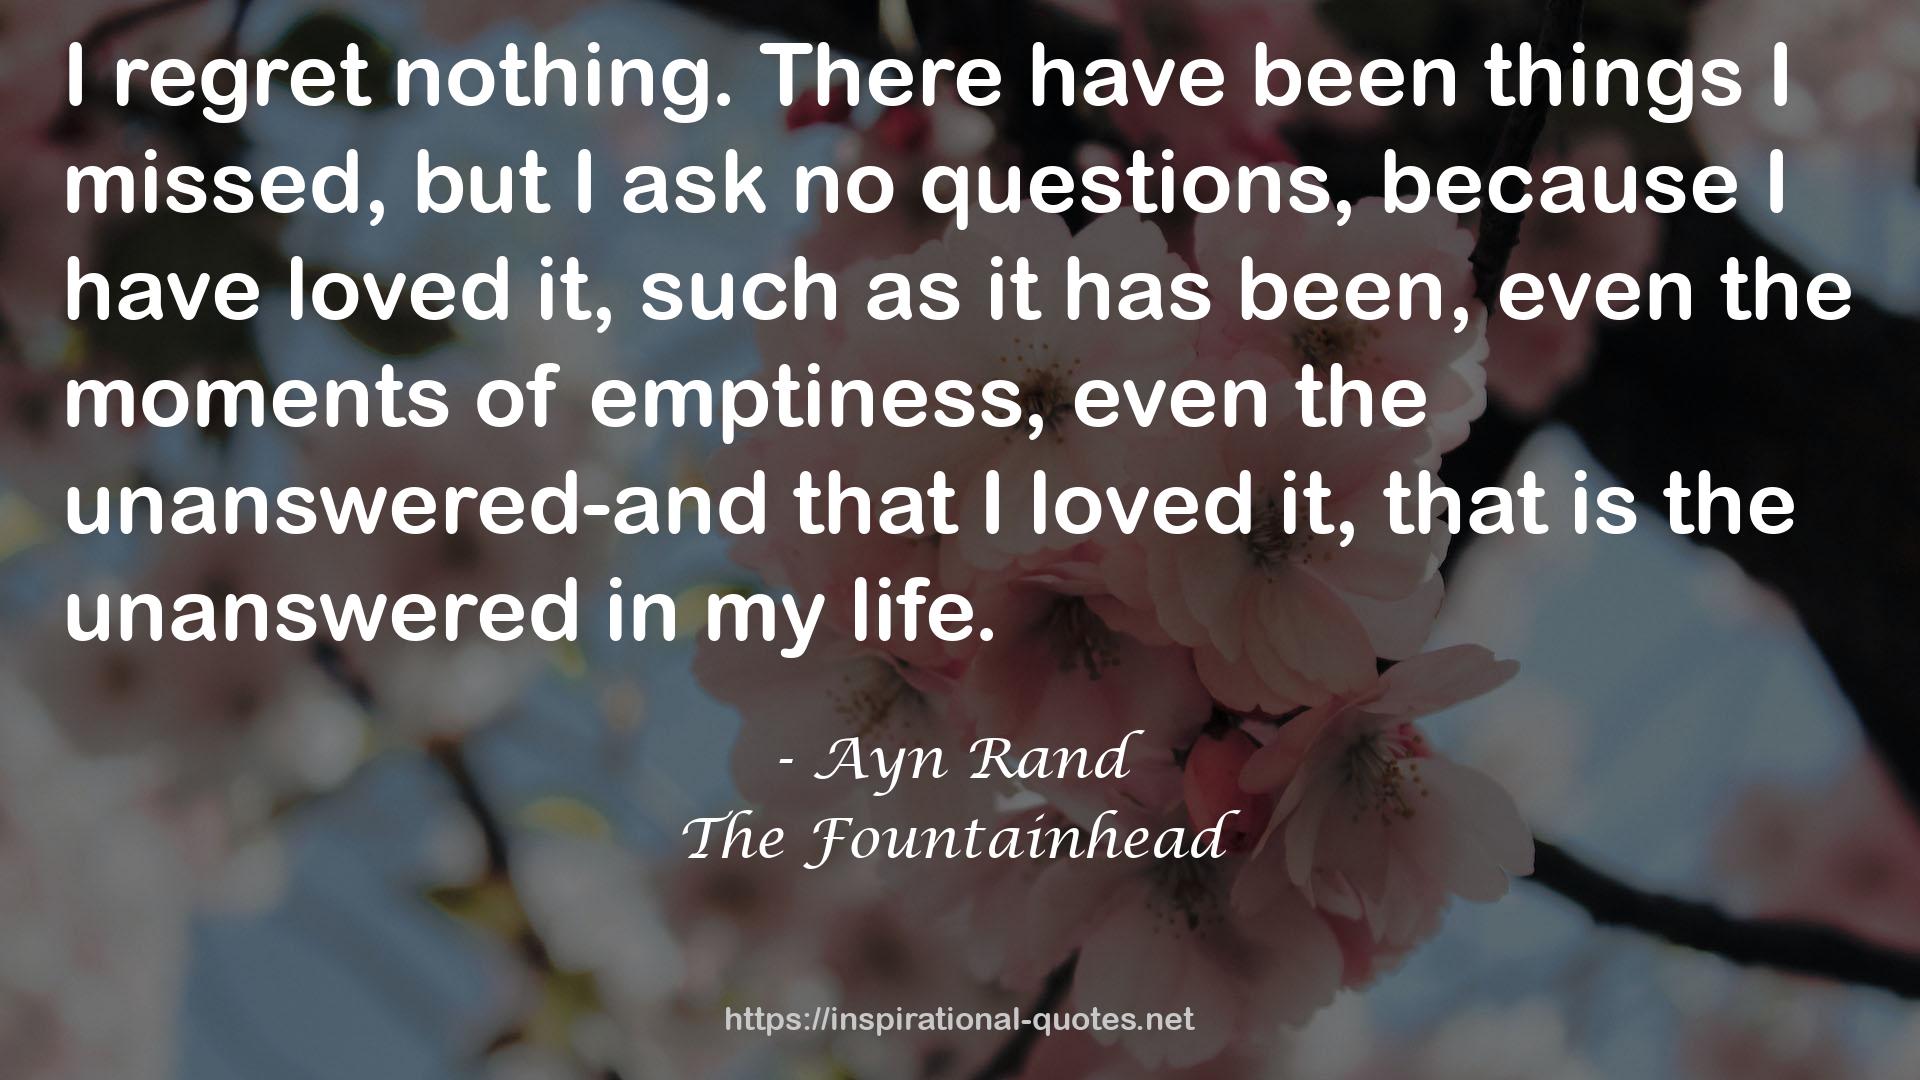 The Fountainhead QUOTES